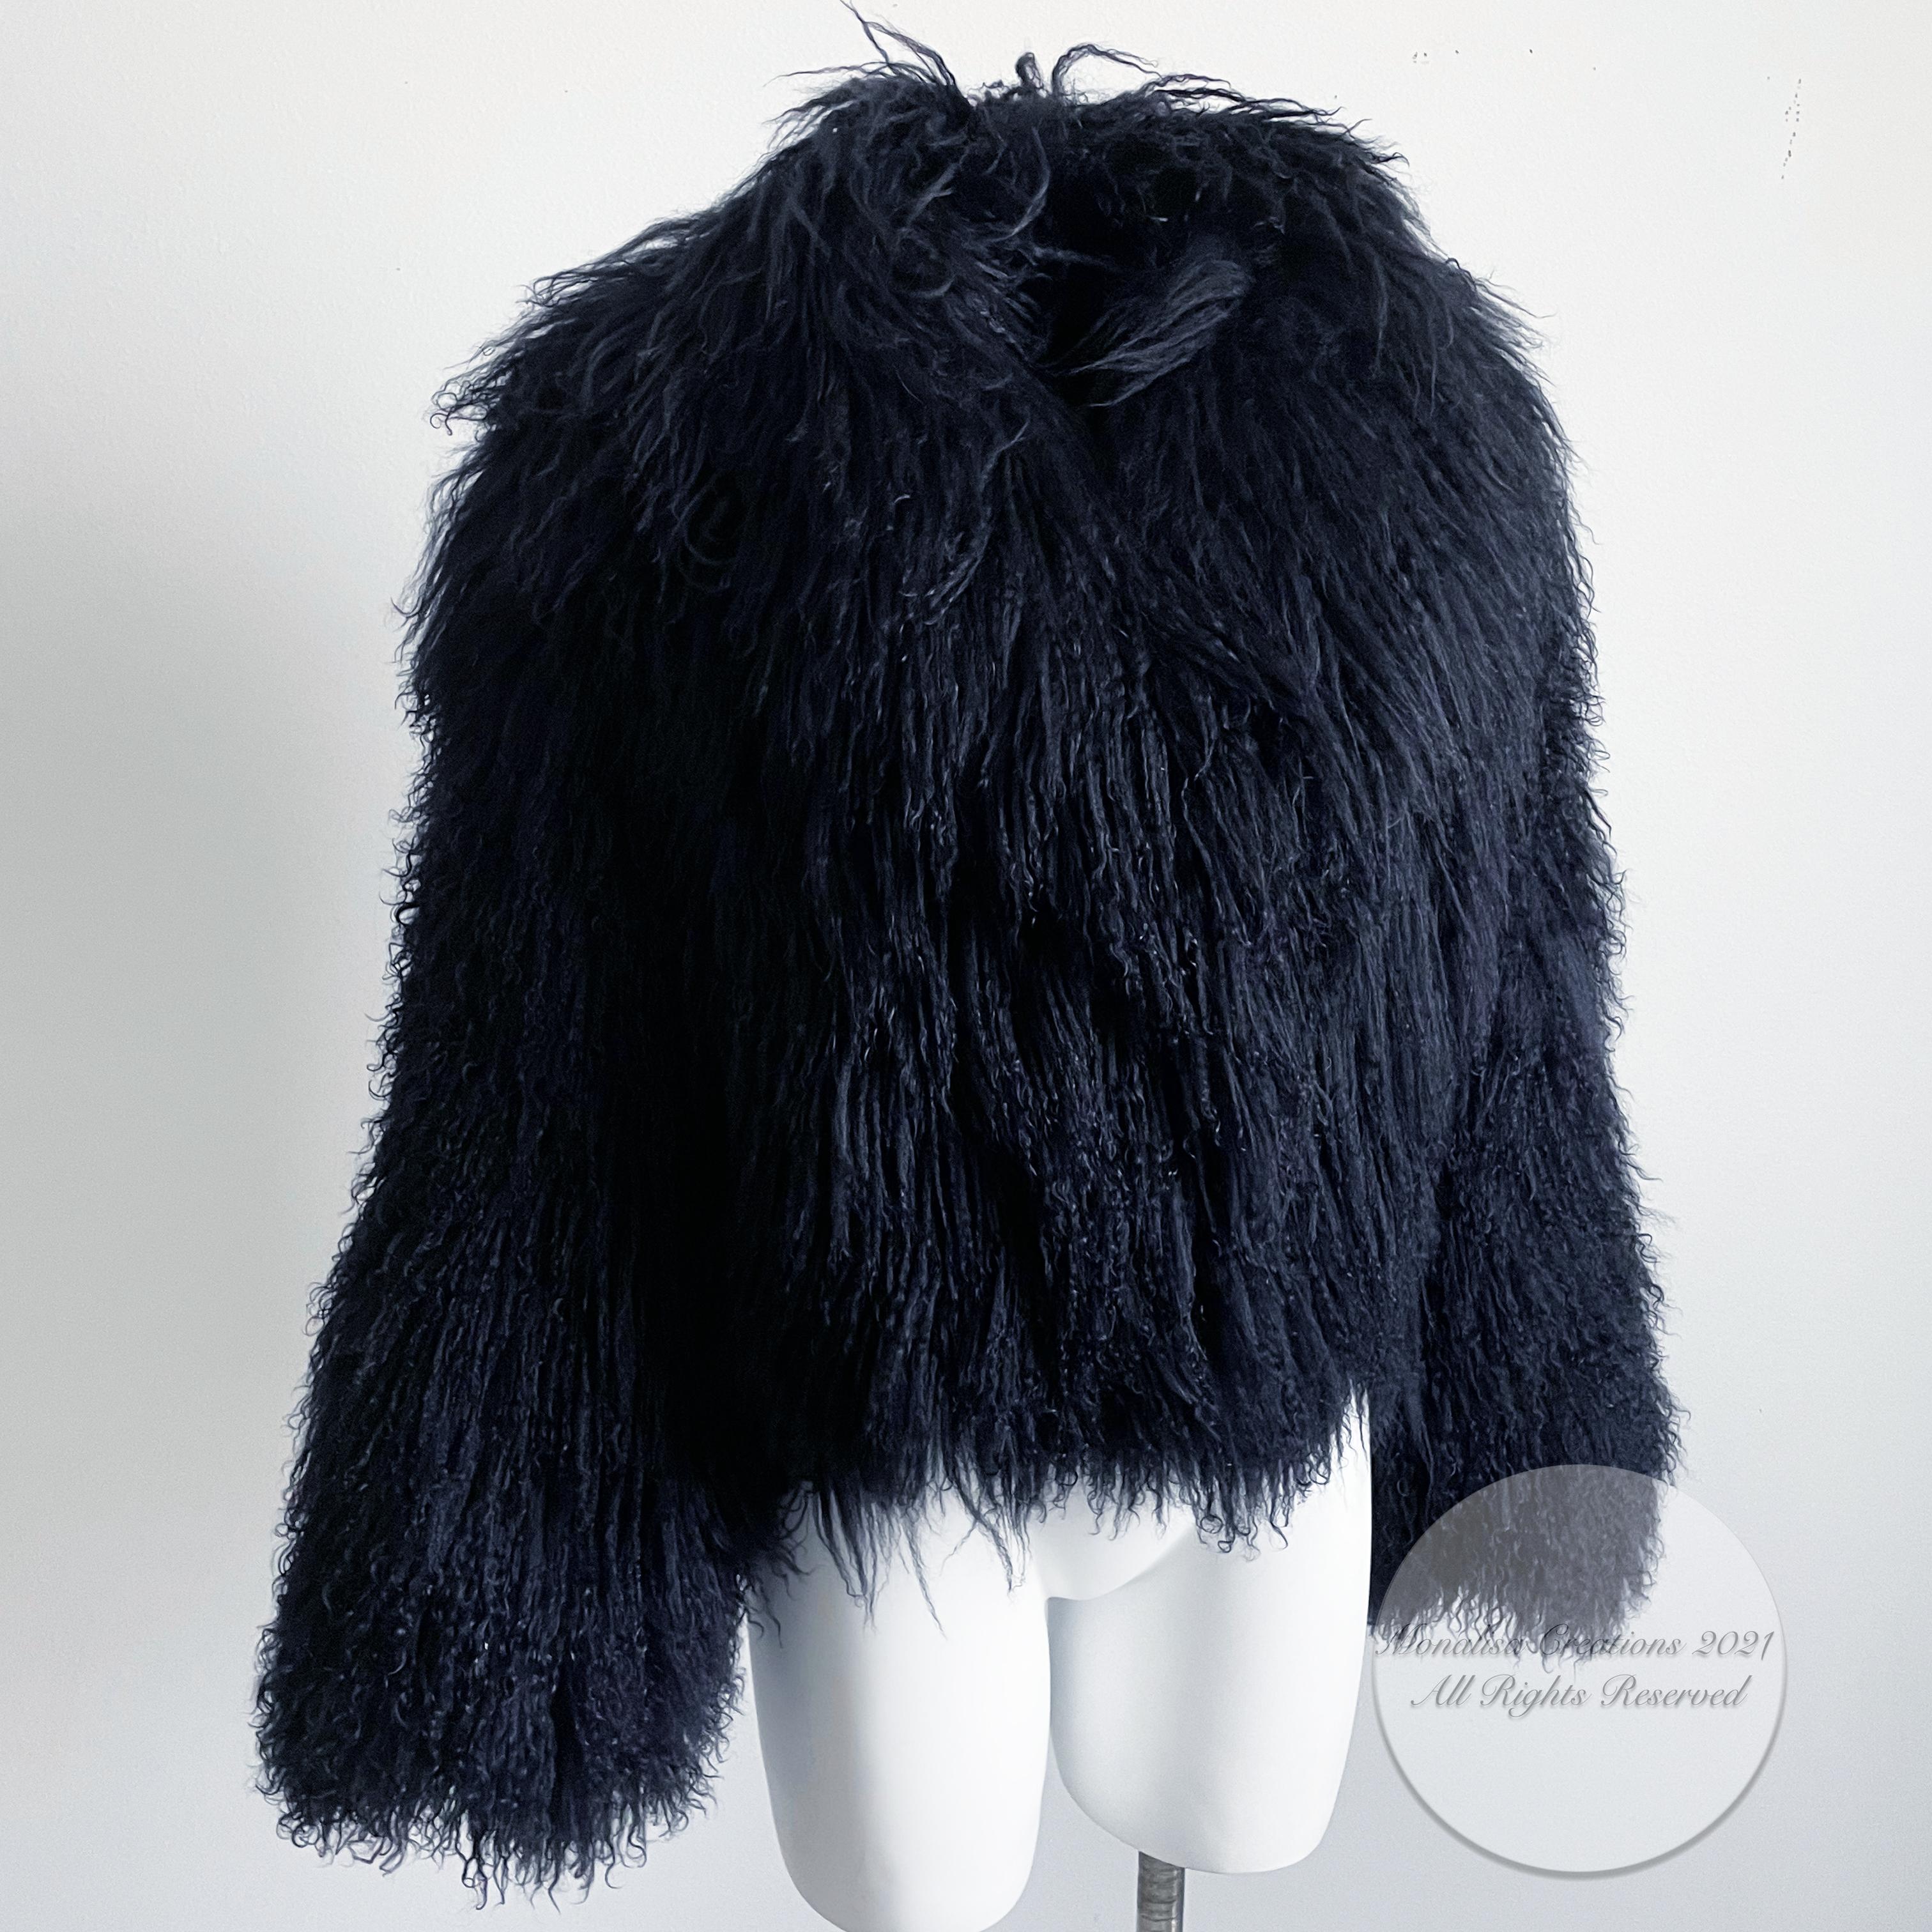 Authentic, preowned, vintage 90s Mongolian lamb fur jacket by Louis Feraud for Saks Fifth Avenue.  Black curly lamb fur, lined in satin with hook/eye closures.  No size tag but fits like a modern S/M, based on these measurements (appx): shoulders -